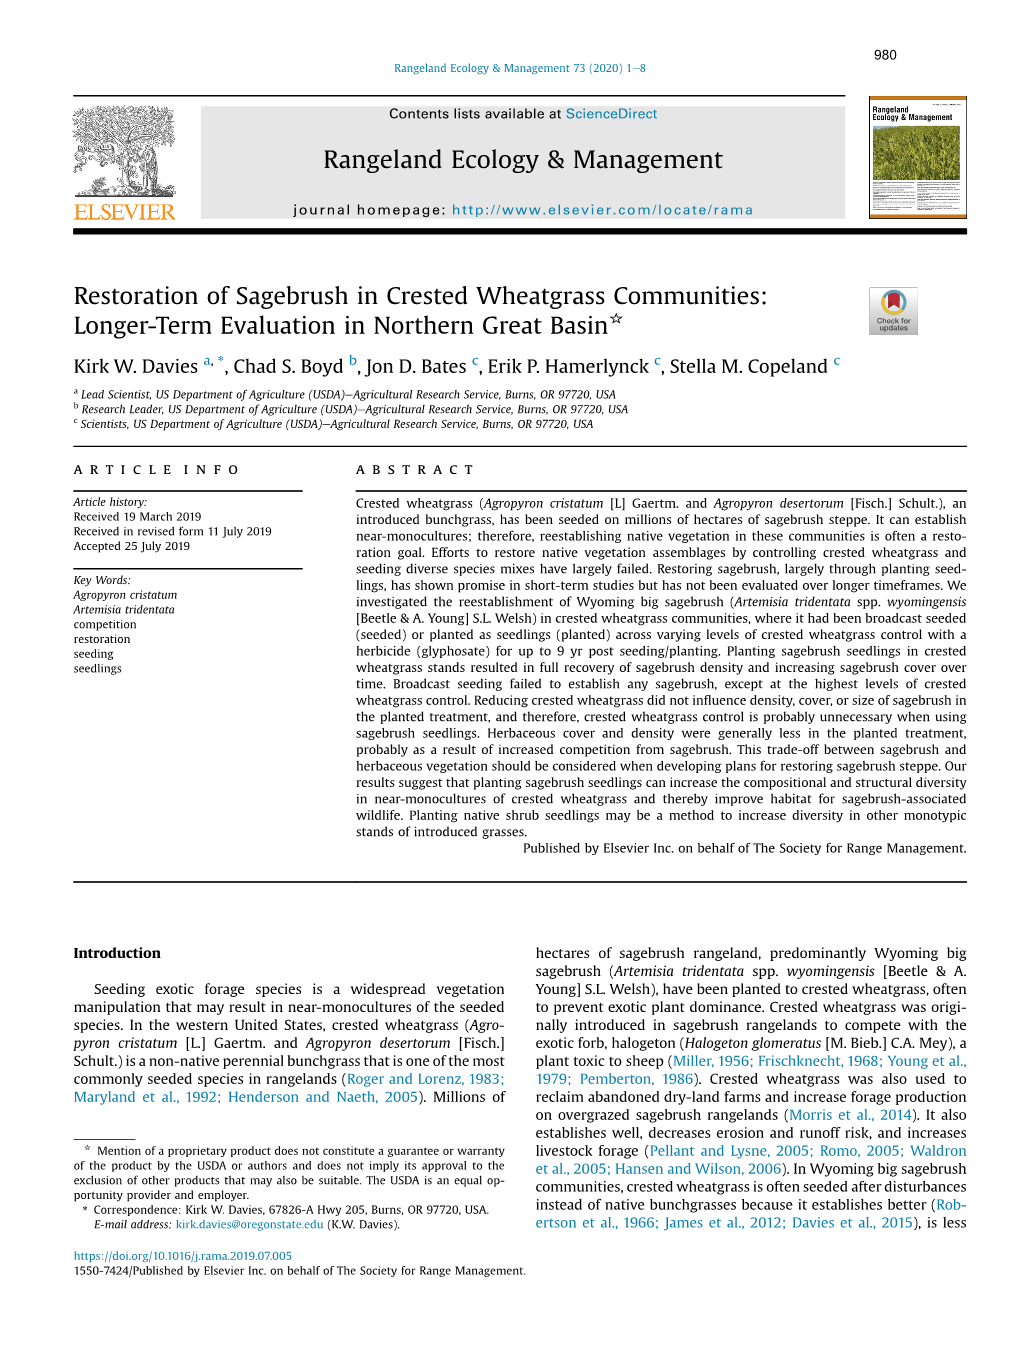 Restoration of Sagebrush in Crested Wheatgrass Communities: Longer-Term Evaluation in Northern Great Basin*